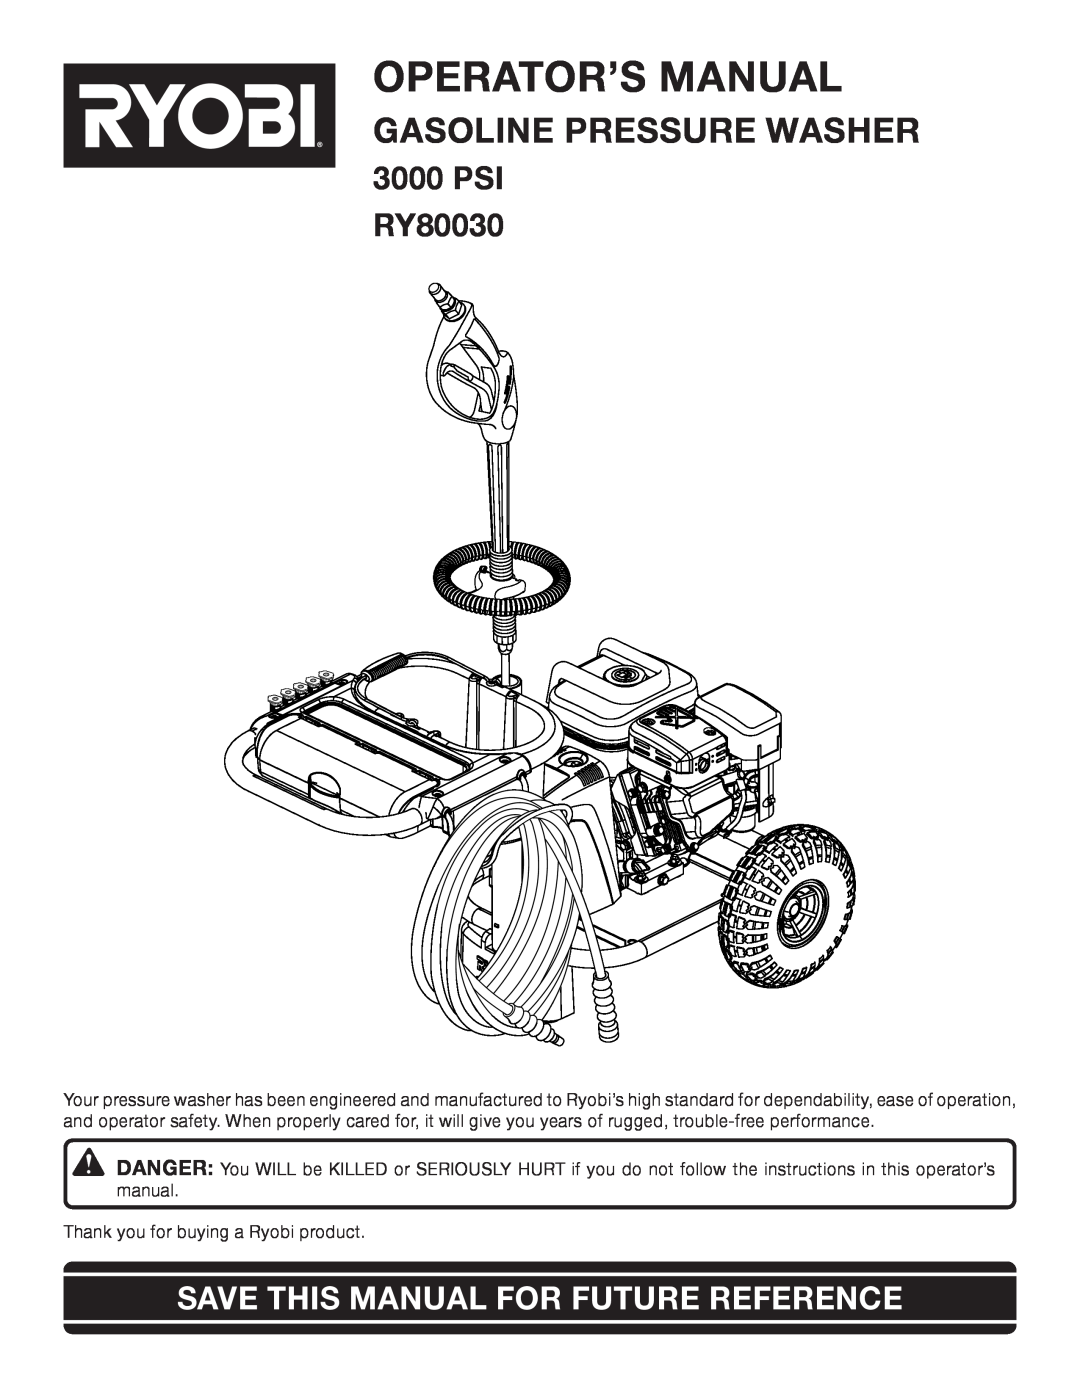 Ryobi Outdoor manual Operator’S Manual, Gasoline Pressure Washer, PSI RY80030, Save This Manual For Future Reference 